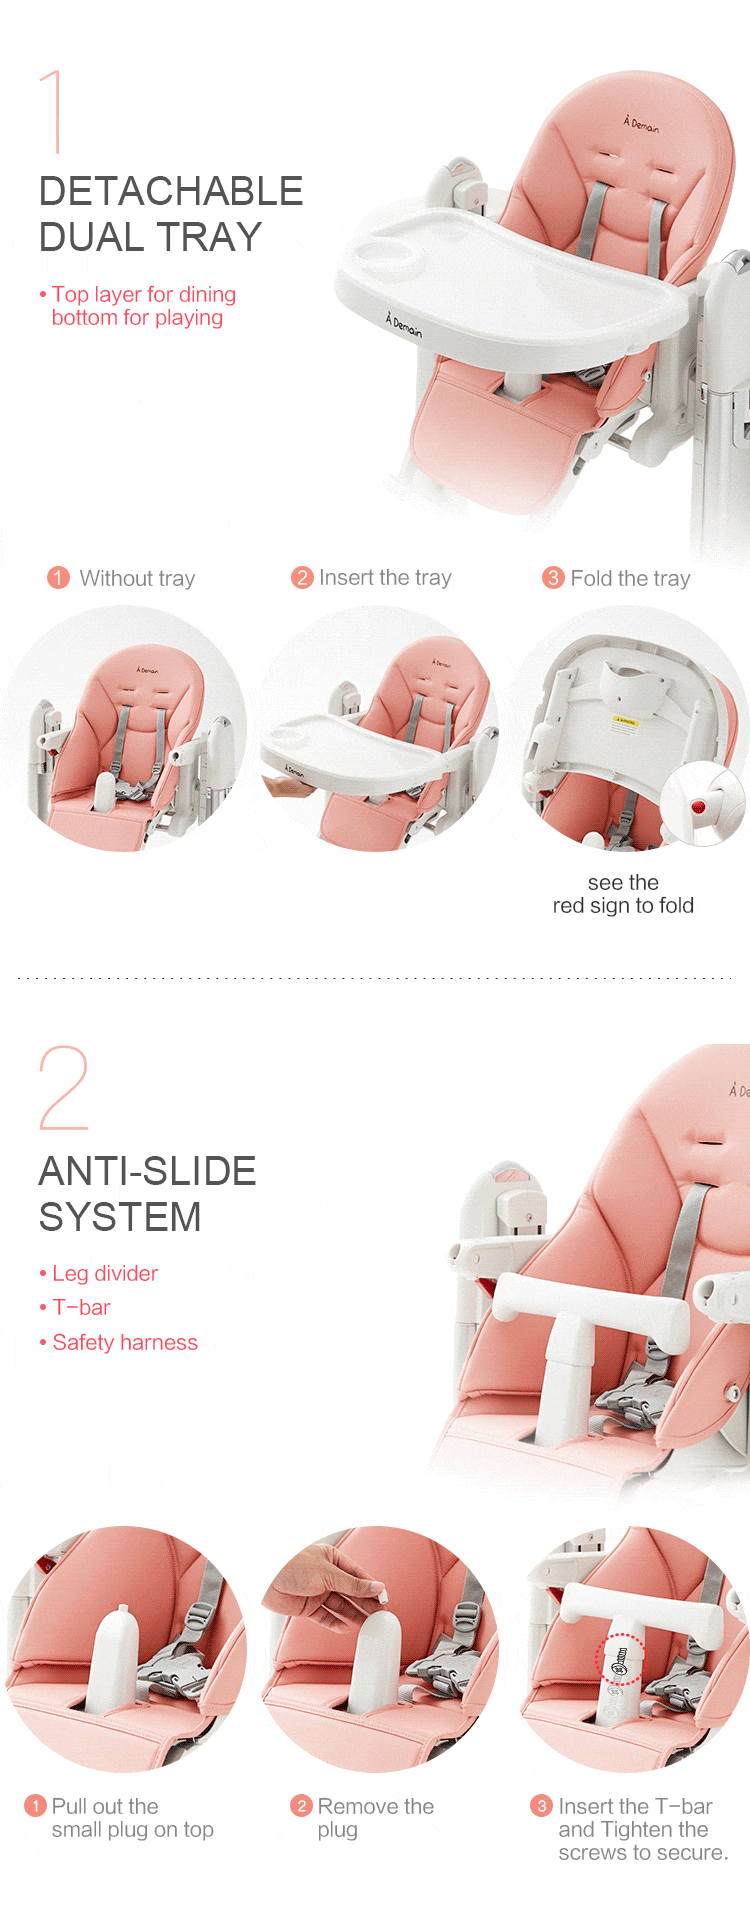 High Chair for babies